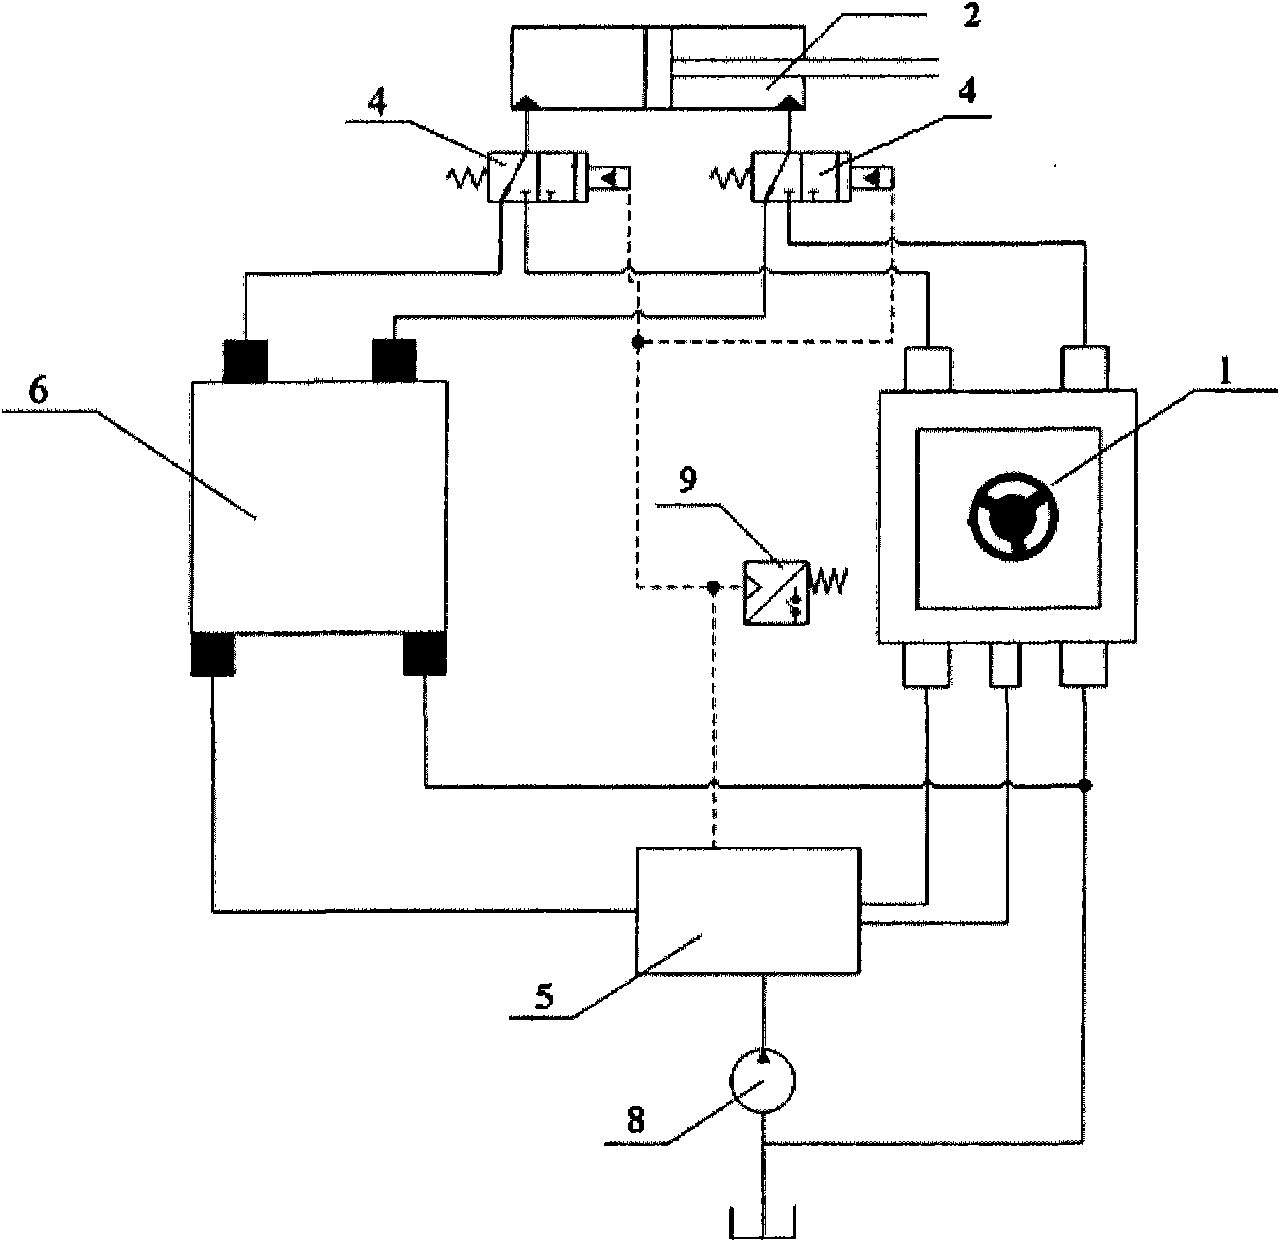 Manual priority tractor self-steering method and device